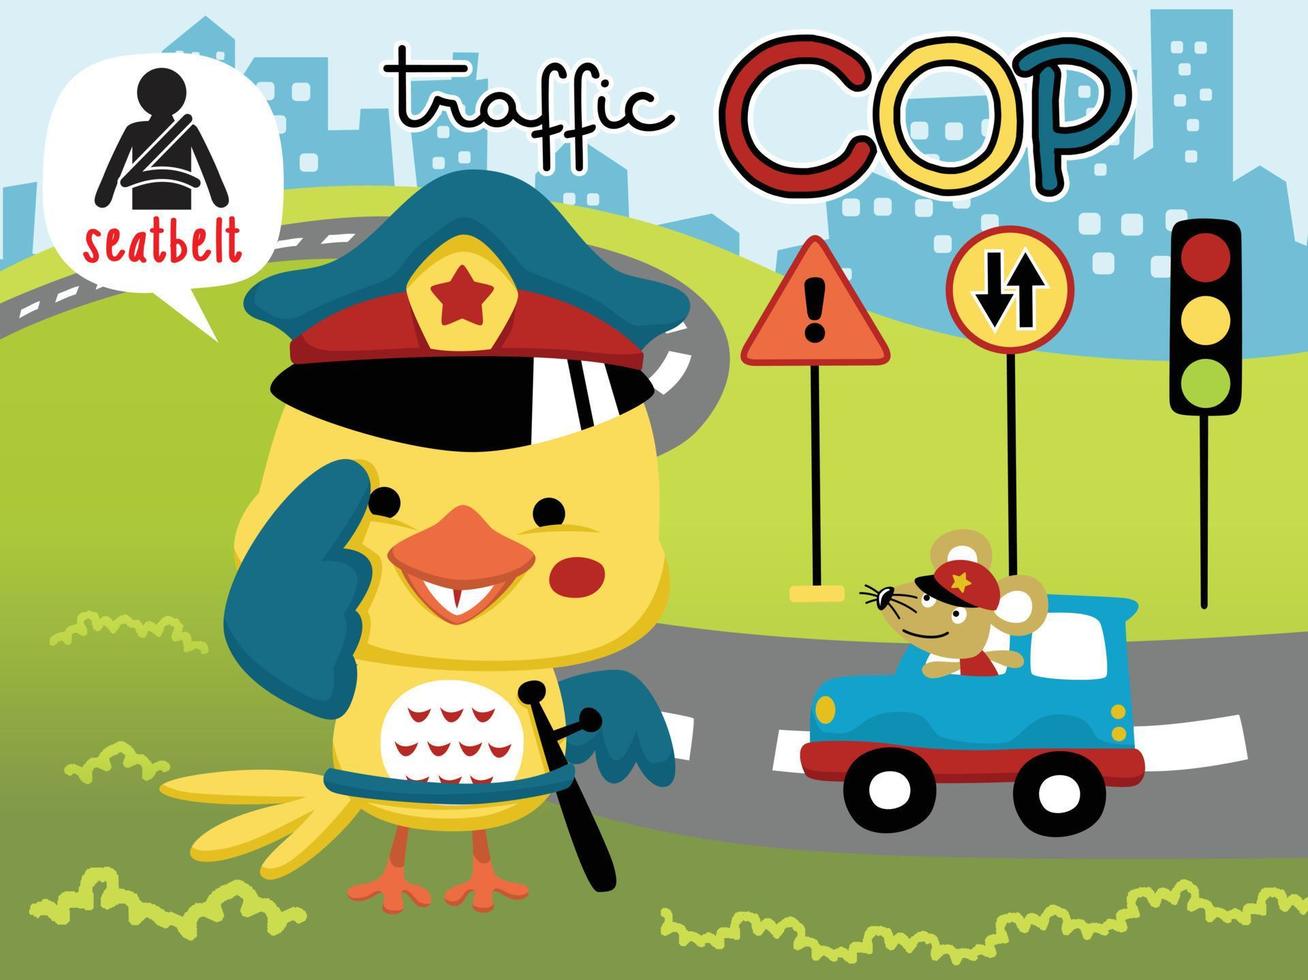 Vector cartoon of cute bird in traffic cop accessories, mouse driving car, city traffic elements illustration